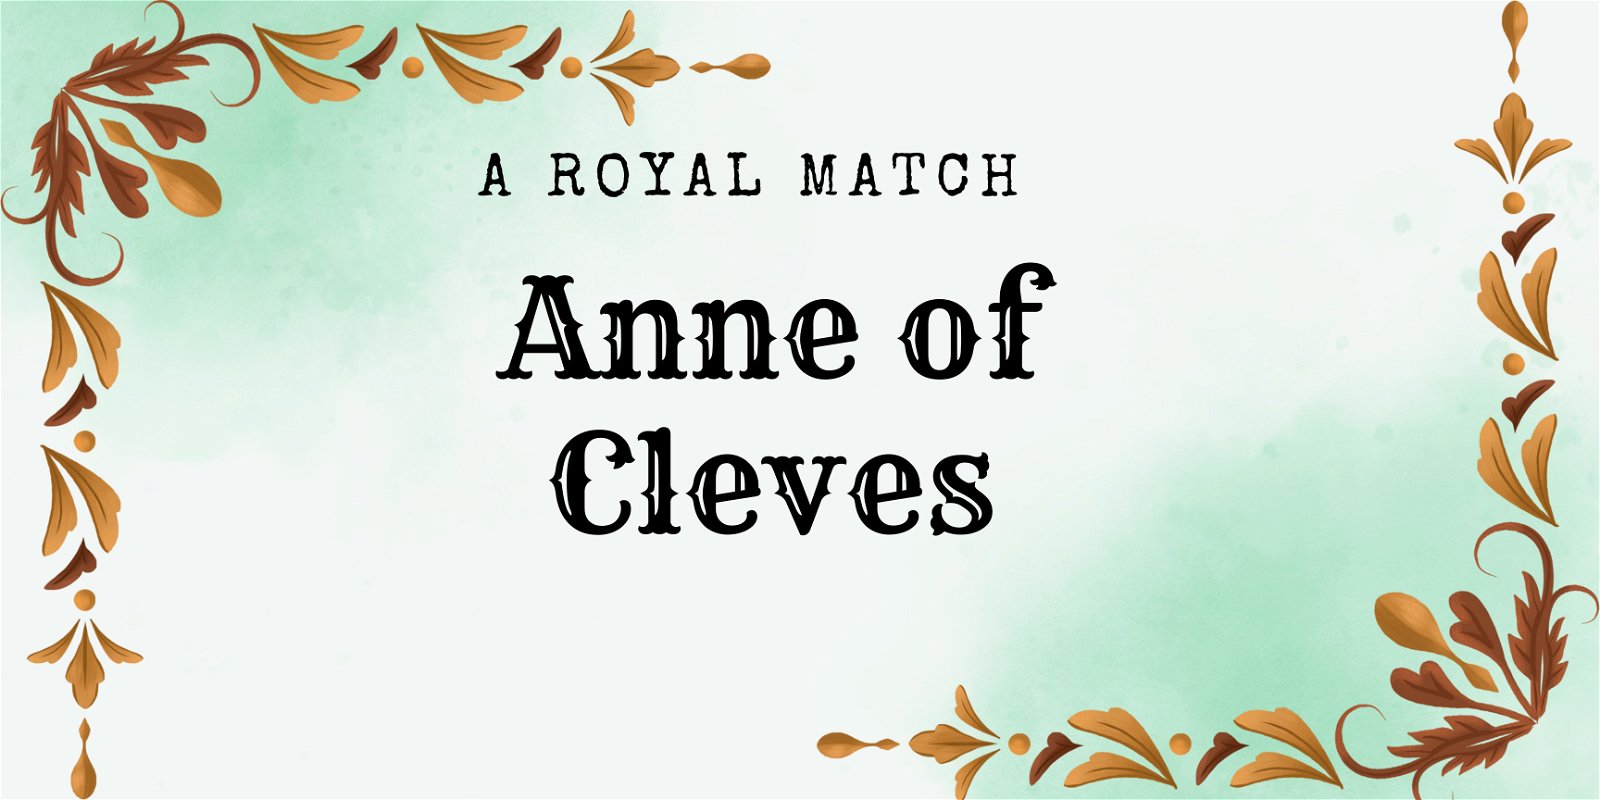 A Royal Match: Anne of Cleves